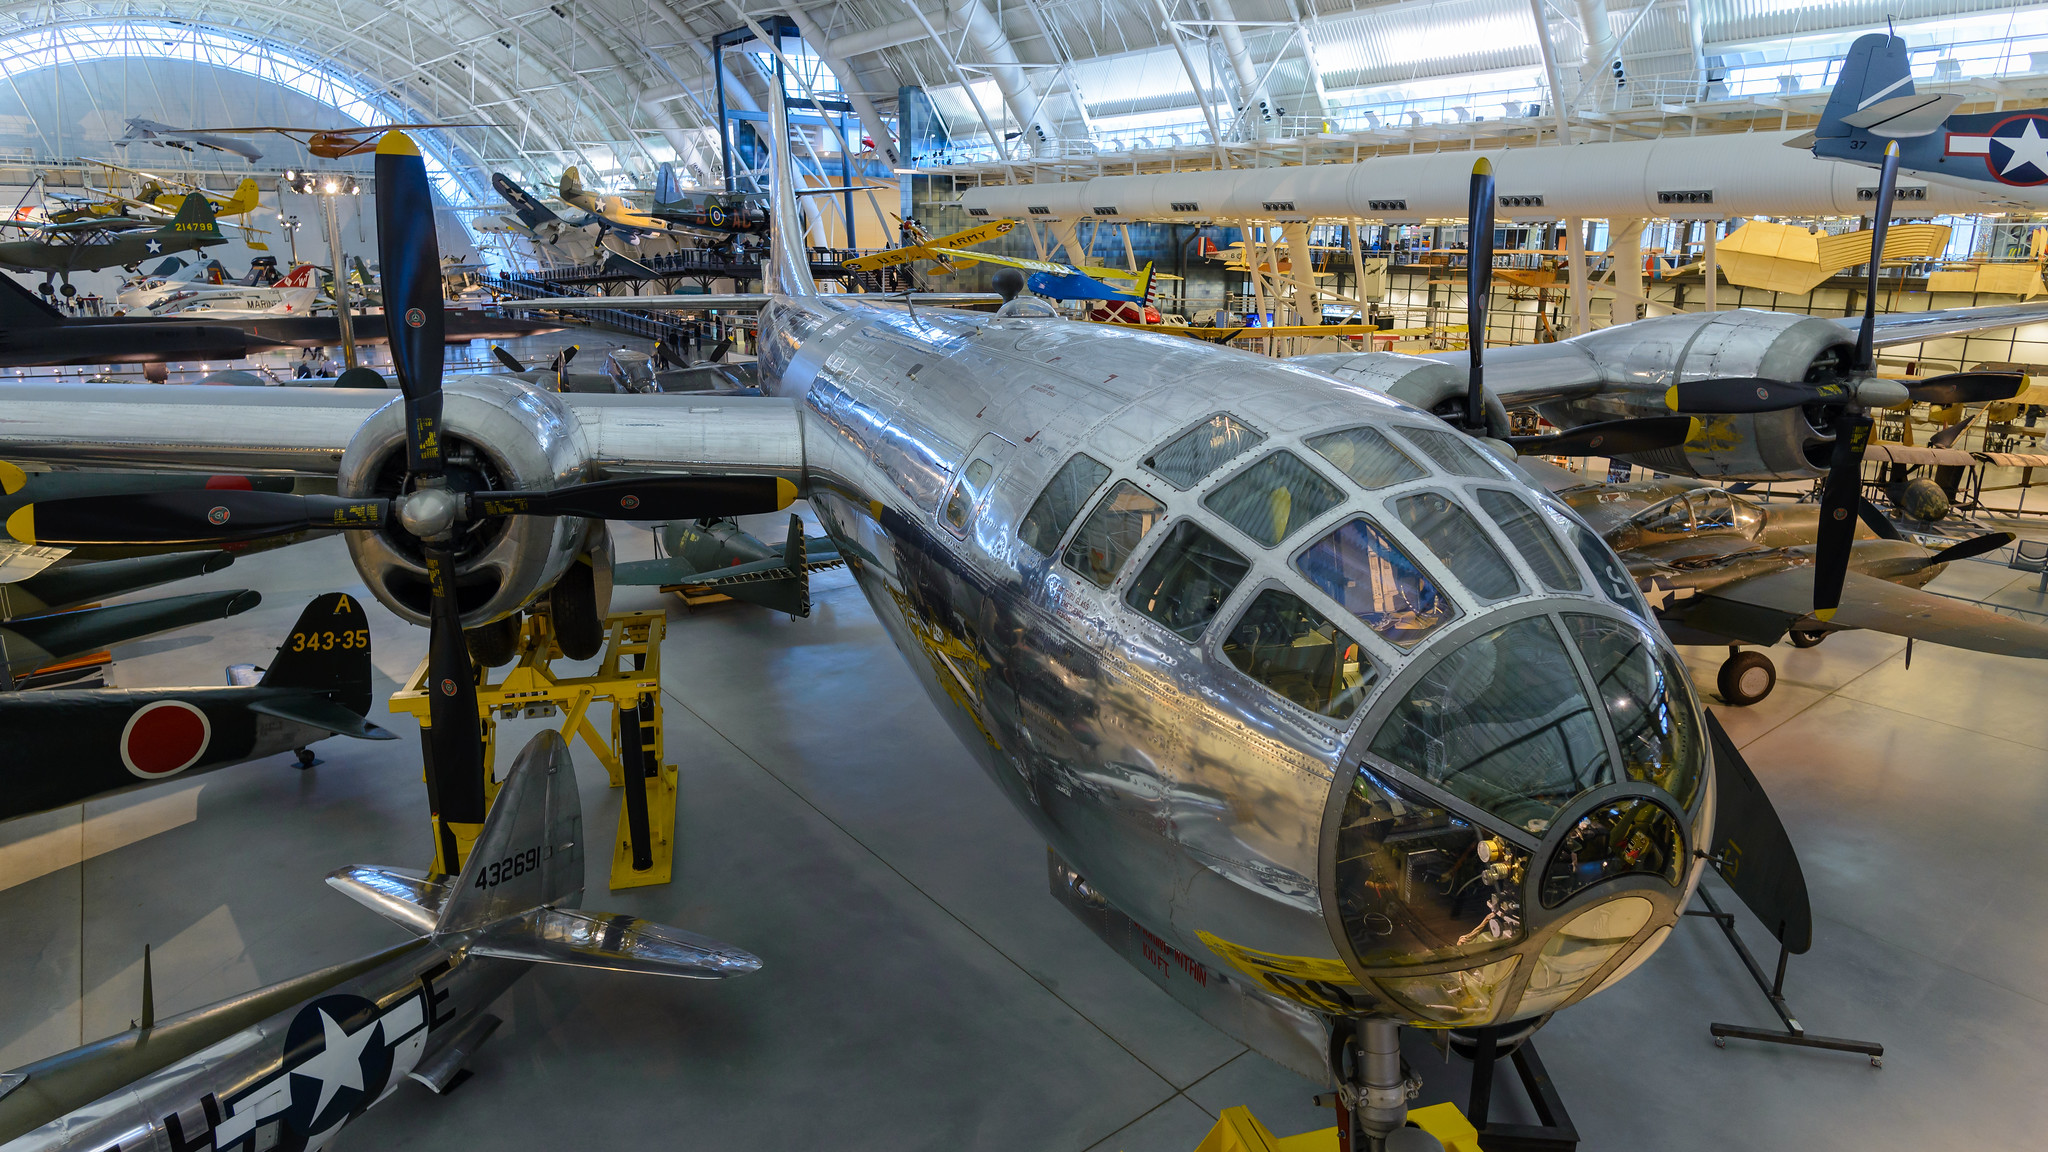 Color Photograph of a large, silver-metallic plane in crowded hanger